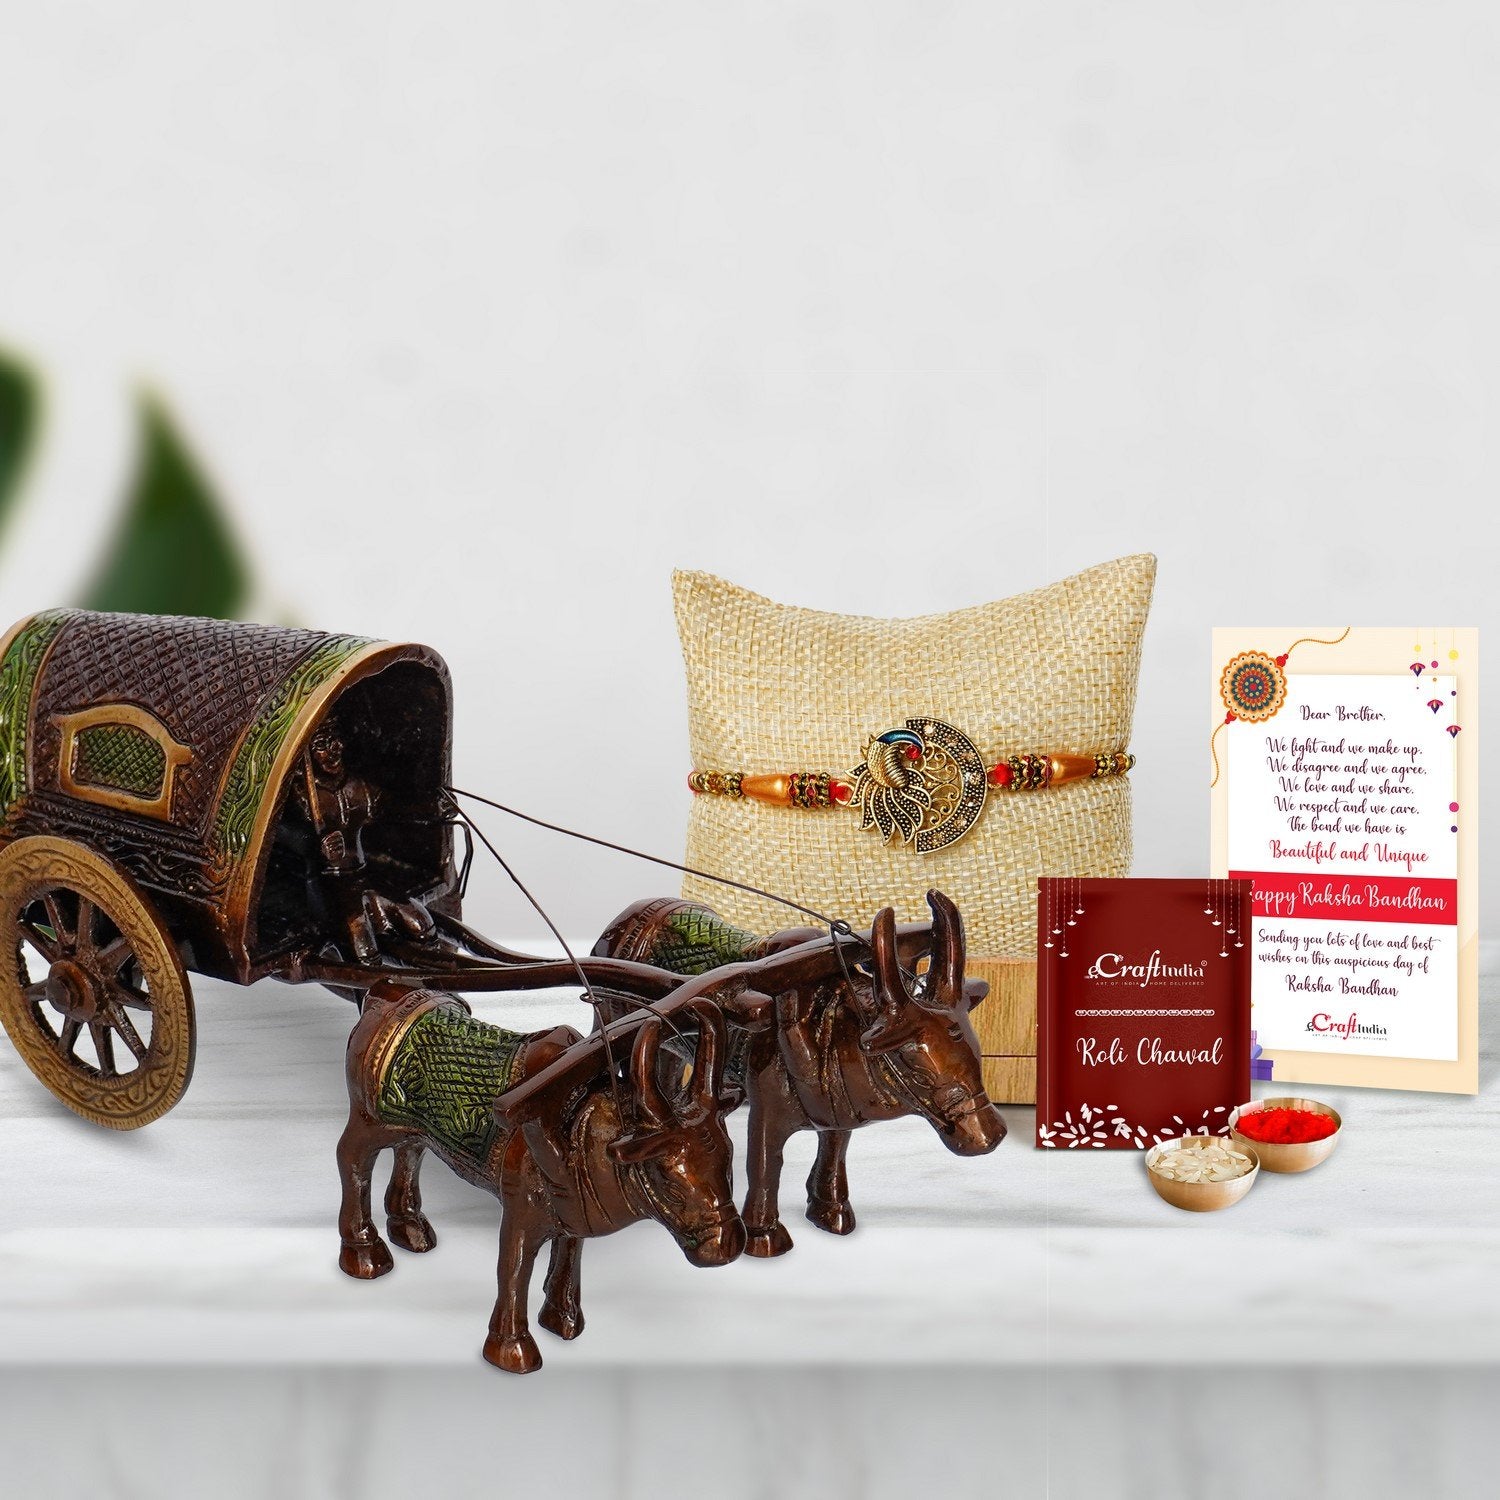 Designer Peacock Rakhi with Brass Brown and Green Antique Finish Closed Bullock Cart  and Roli Chawal Pack, Best Wishes Greeting Card